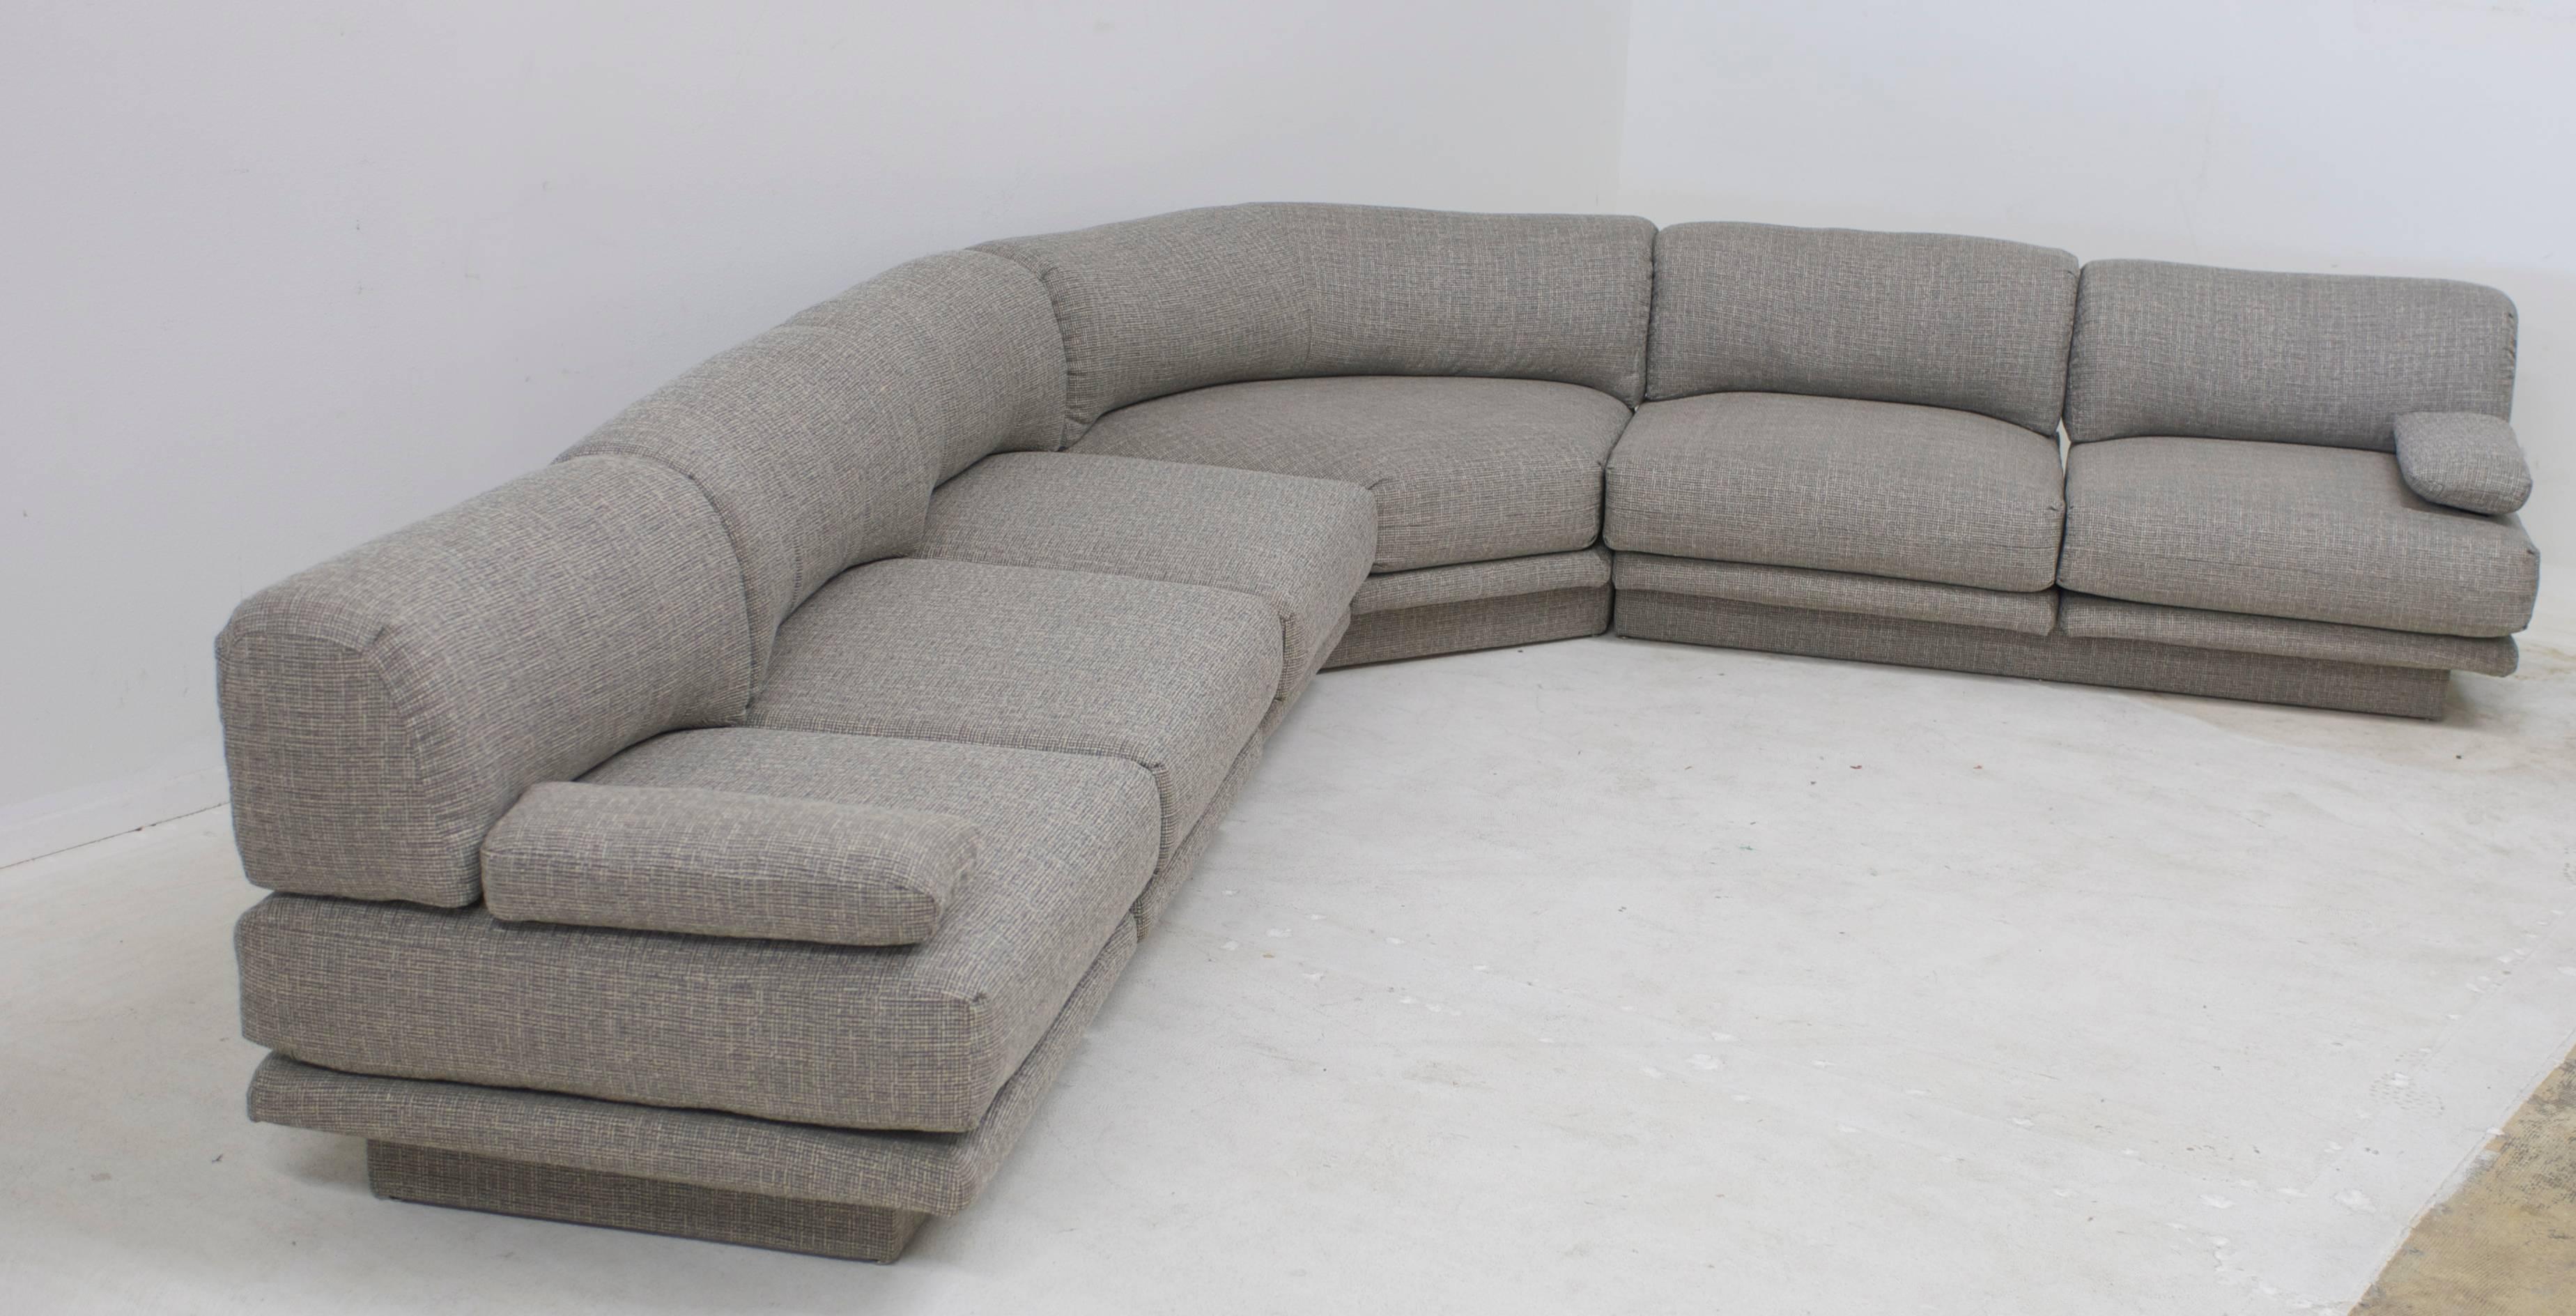 With a nod to the 1970s era of Courreges fashion and the style of Pierre Cardin and De Sede, this low slung versatile sectional can be configured in multiple ways. As shown in the photos, an L a U or a straight long sofa can be achieved if you take